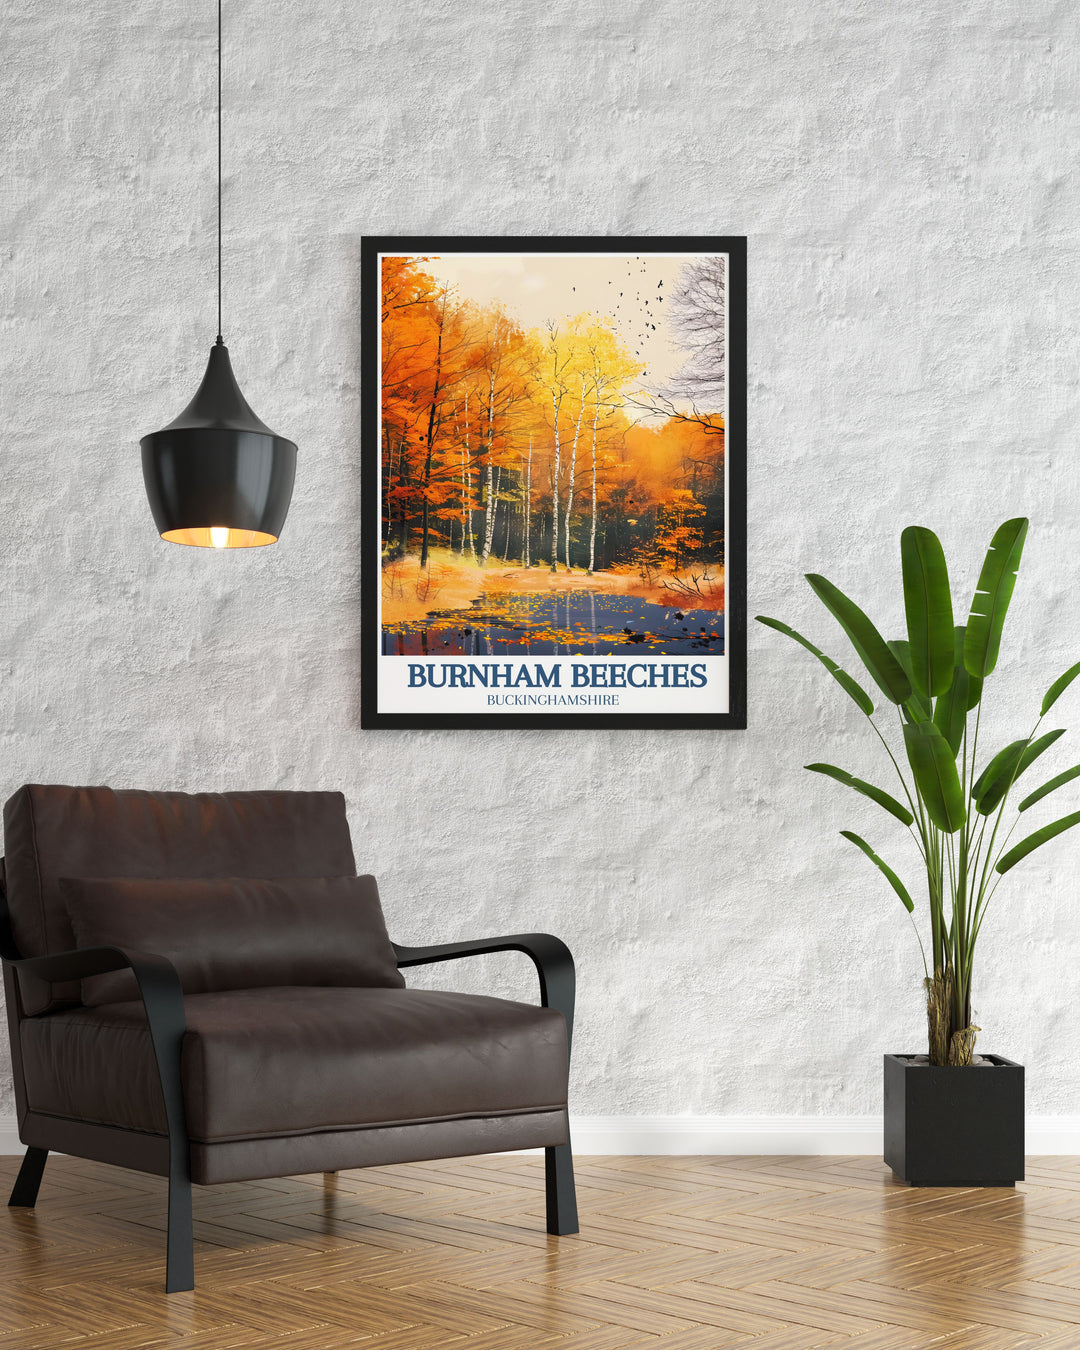 Unique artwork of Burnham Beeches featuring Upper Pond and Farnham Common, perfect for personalized gifts or home decor. This print captures the essence of Englands most scenic countryside.